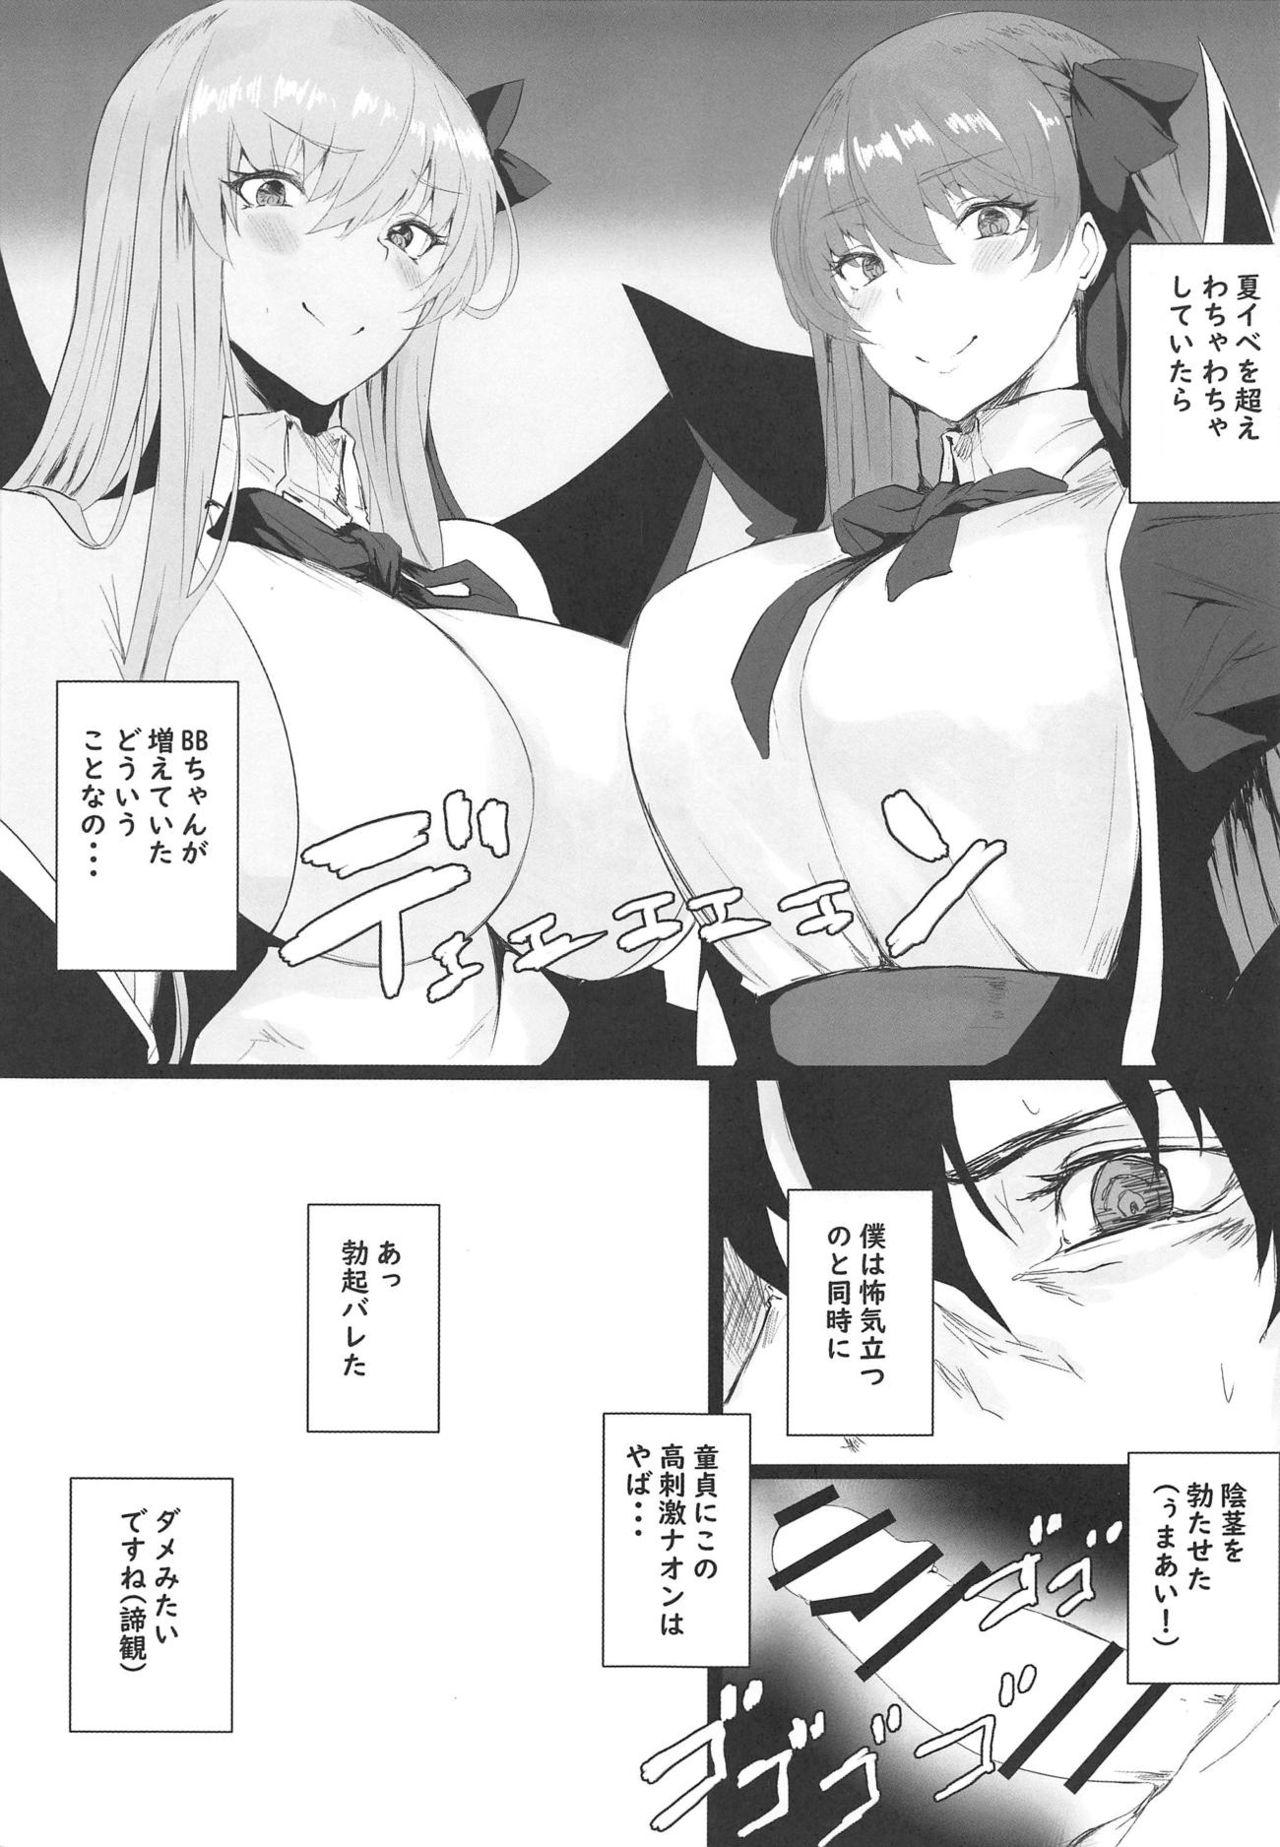 Realsex VIOLATE A SANCTUARY - Fate grand order Banging - Page 2